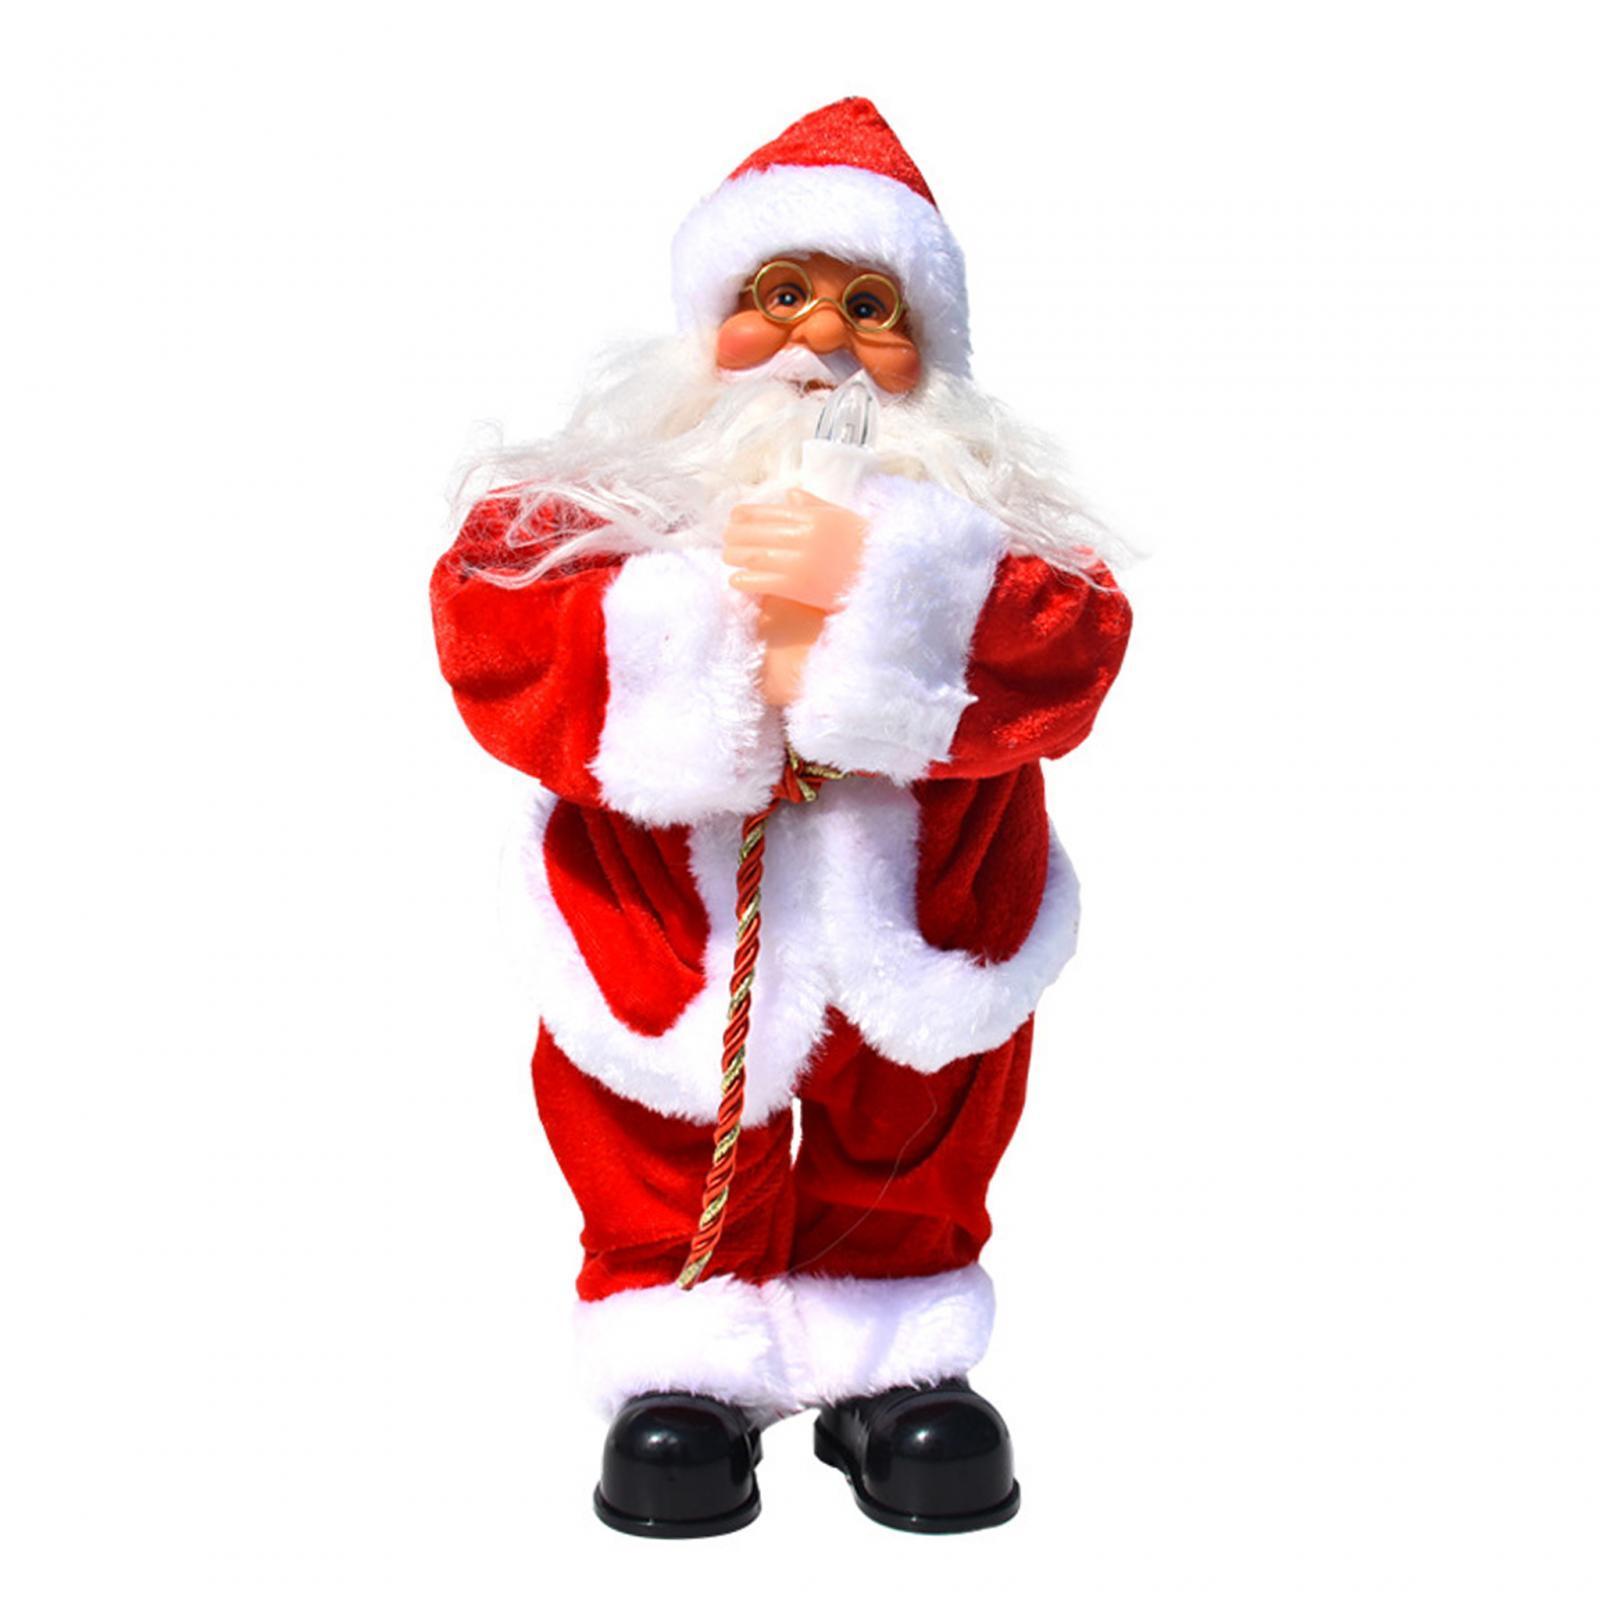 Electric Santa Claus Doll Toy Gift for Shopping Malls Household Desktop